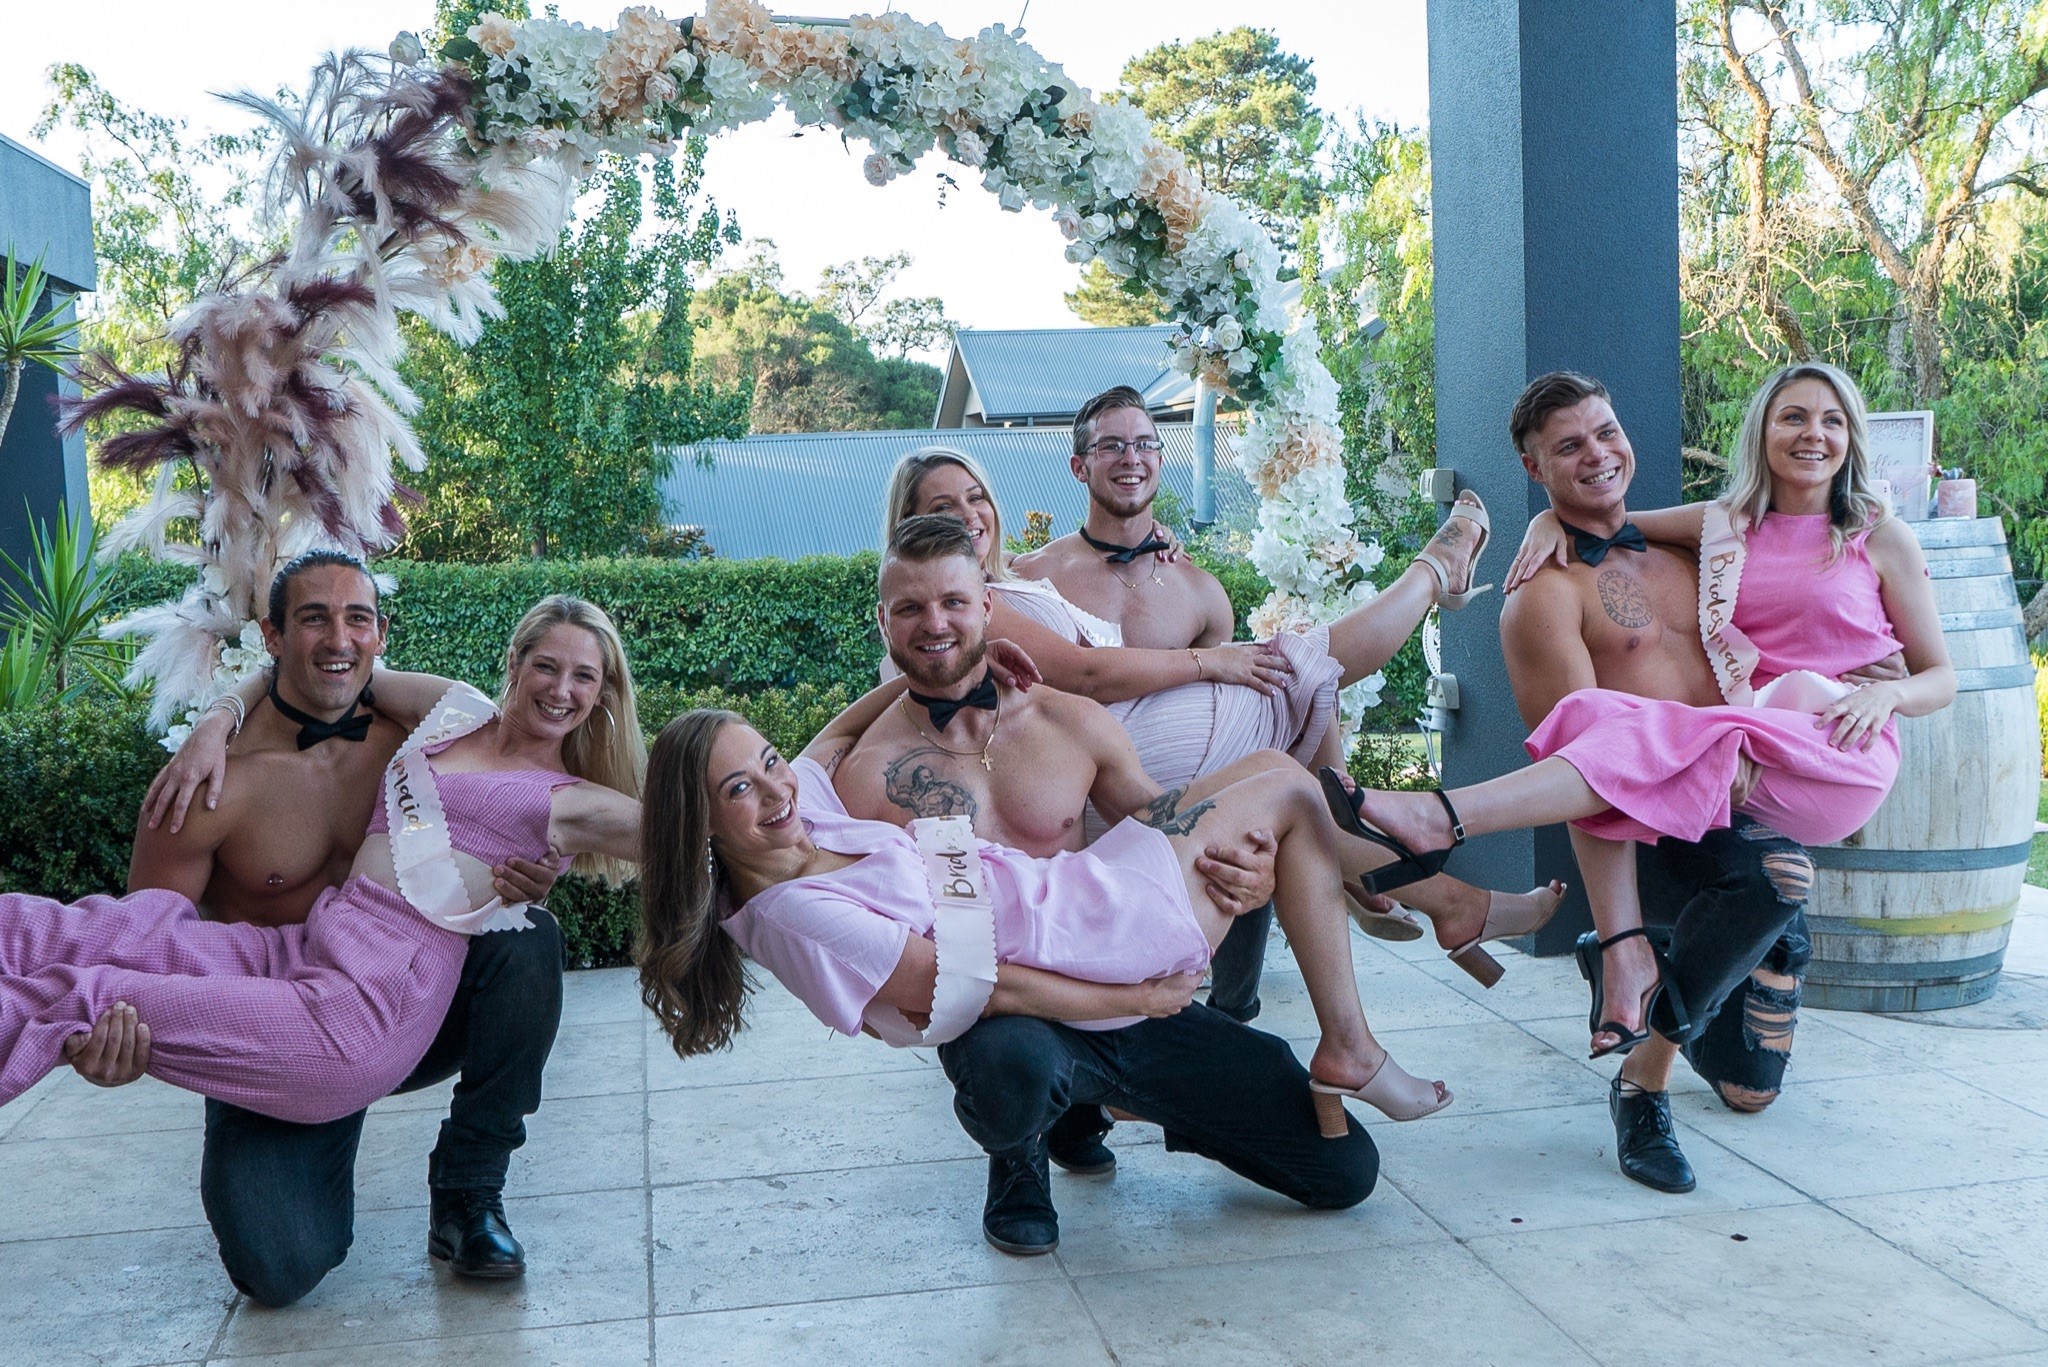 Travis & Co's Topless Waiters